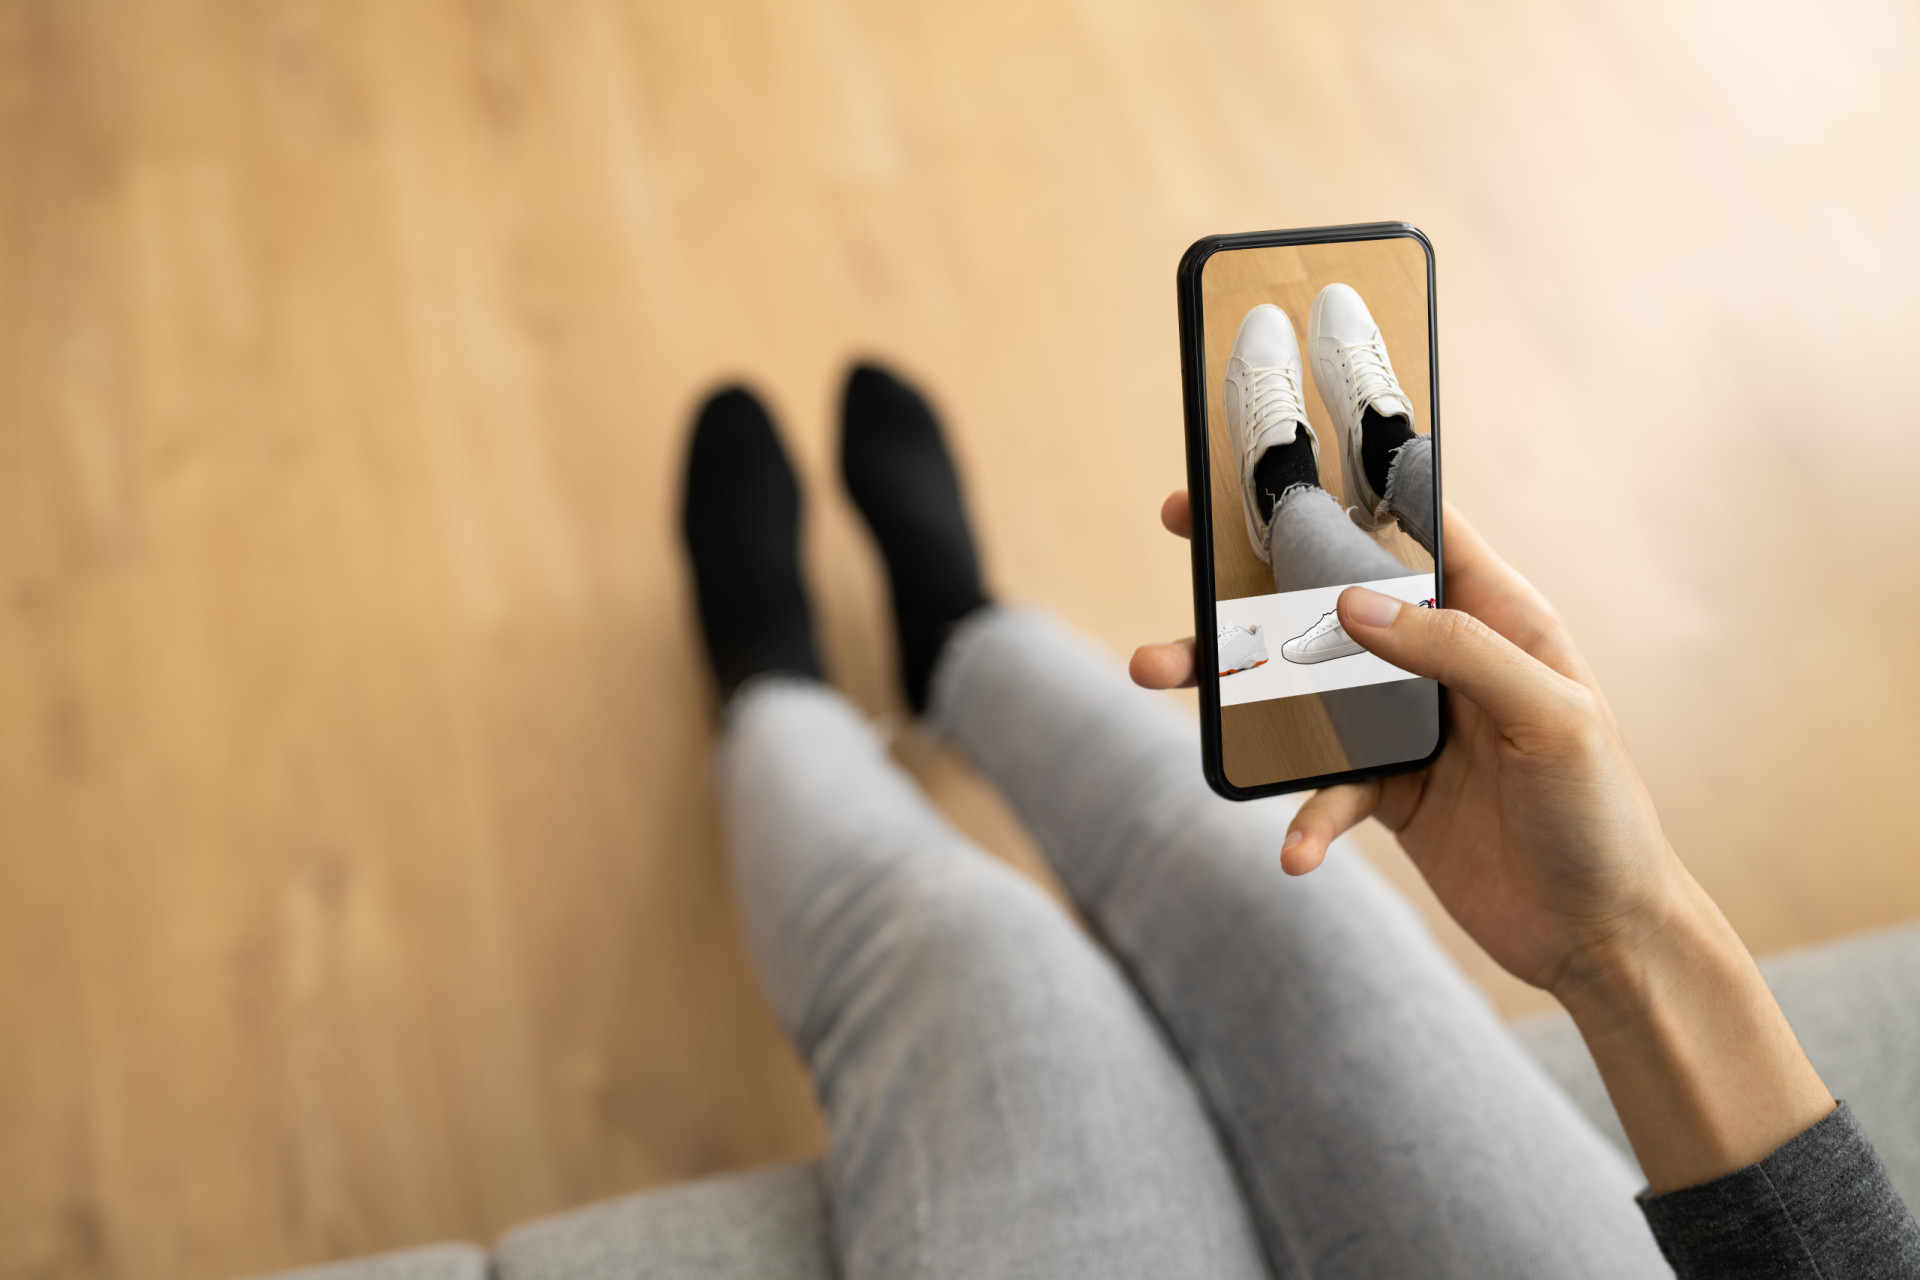 <p>Virtual Try-On allows users to virtually experience products before purchasing. It utilizes AR to overlay digital representations of items onto the user's real-world environment, enhancing the online shopping experience.</p>